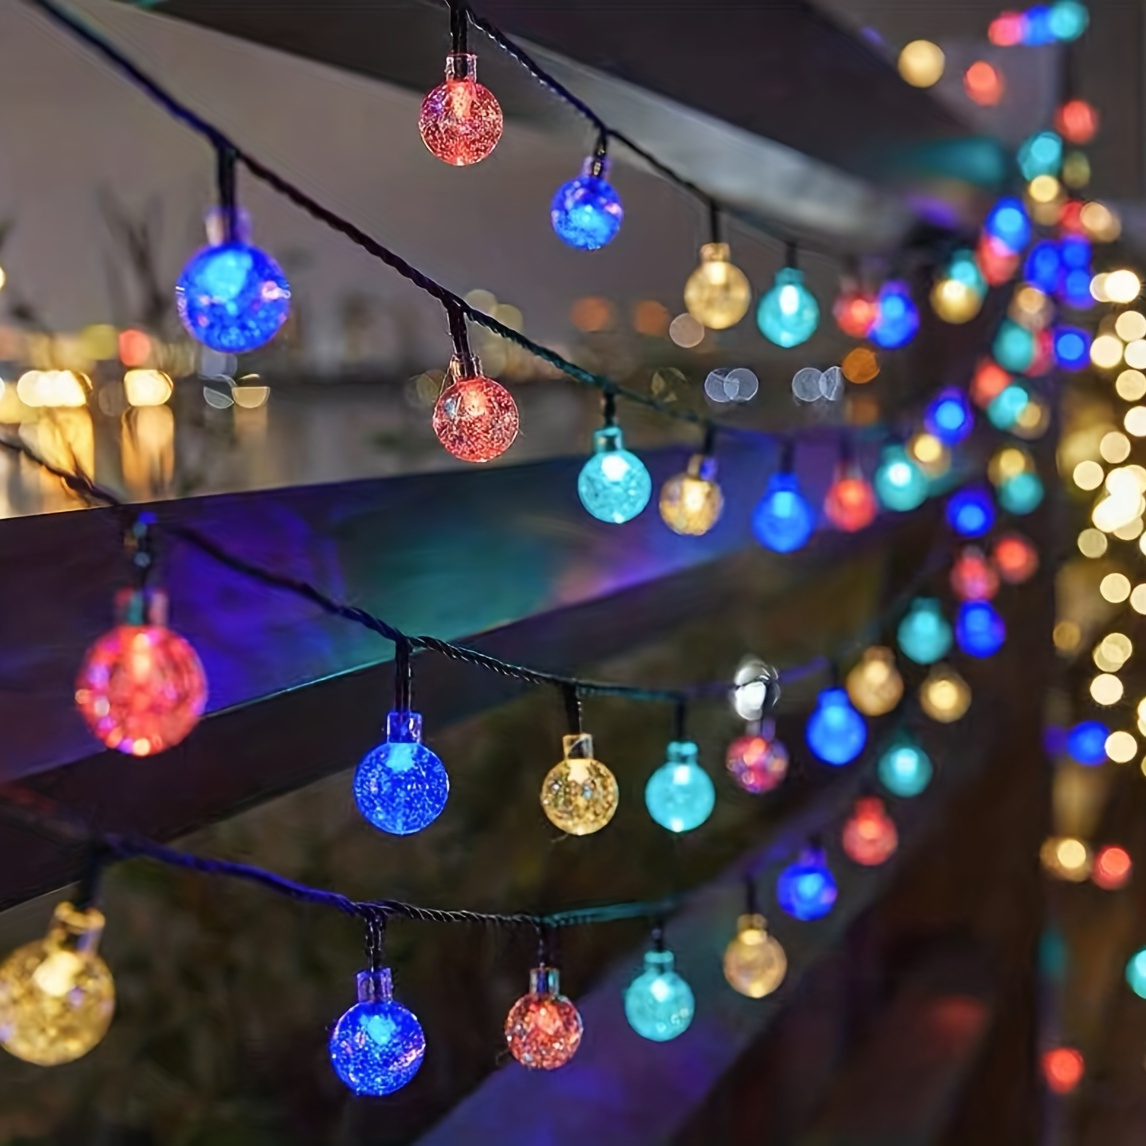 

20-led Solar Crystal Ball String Lights - Ip65 Waterproof, 8 Modes, Perfect For Outdoor Garden, Patio Parties & Christmas Decorations (warm White/colorful)